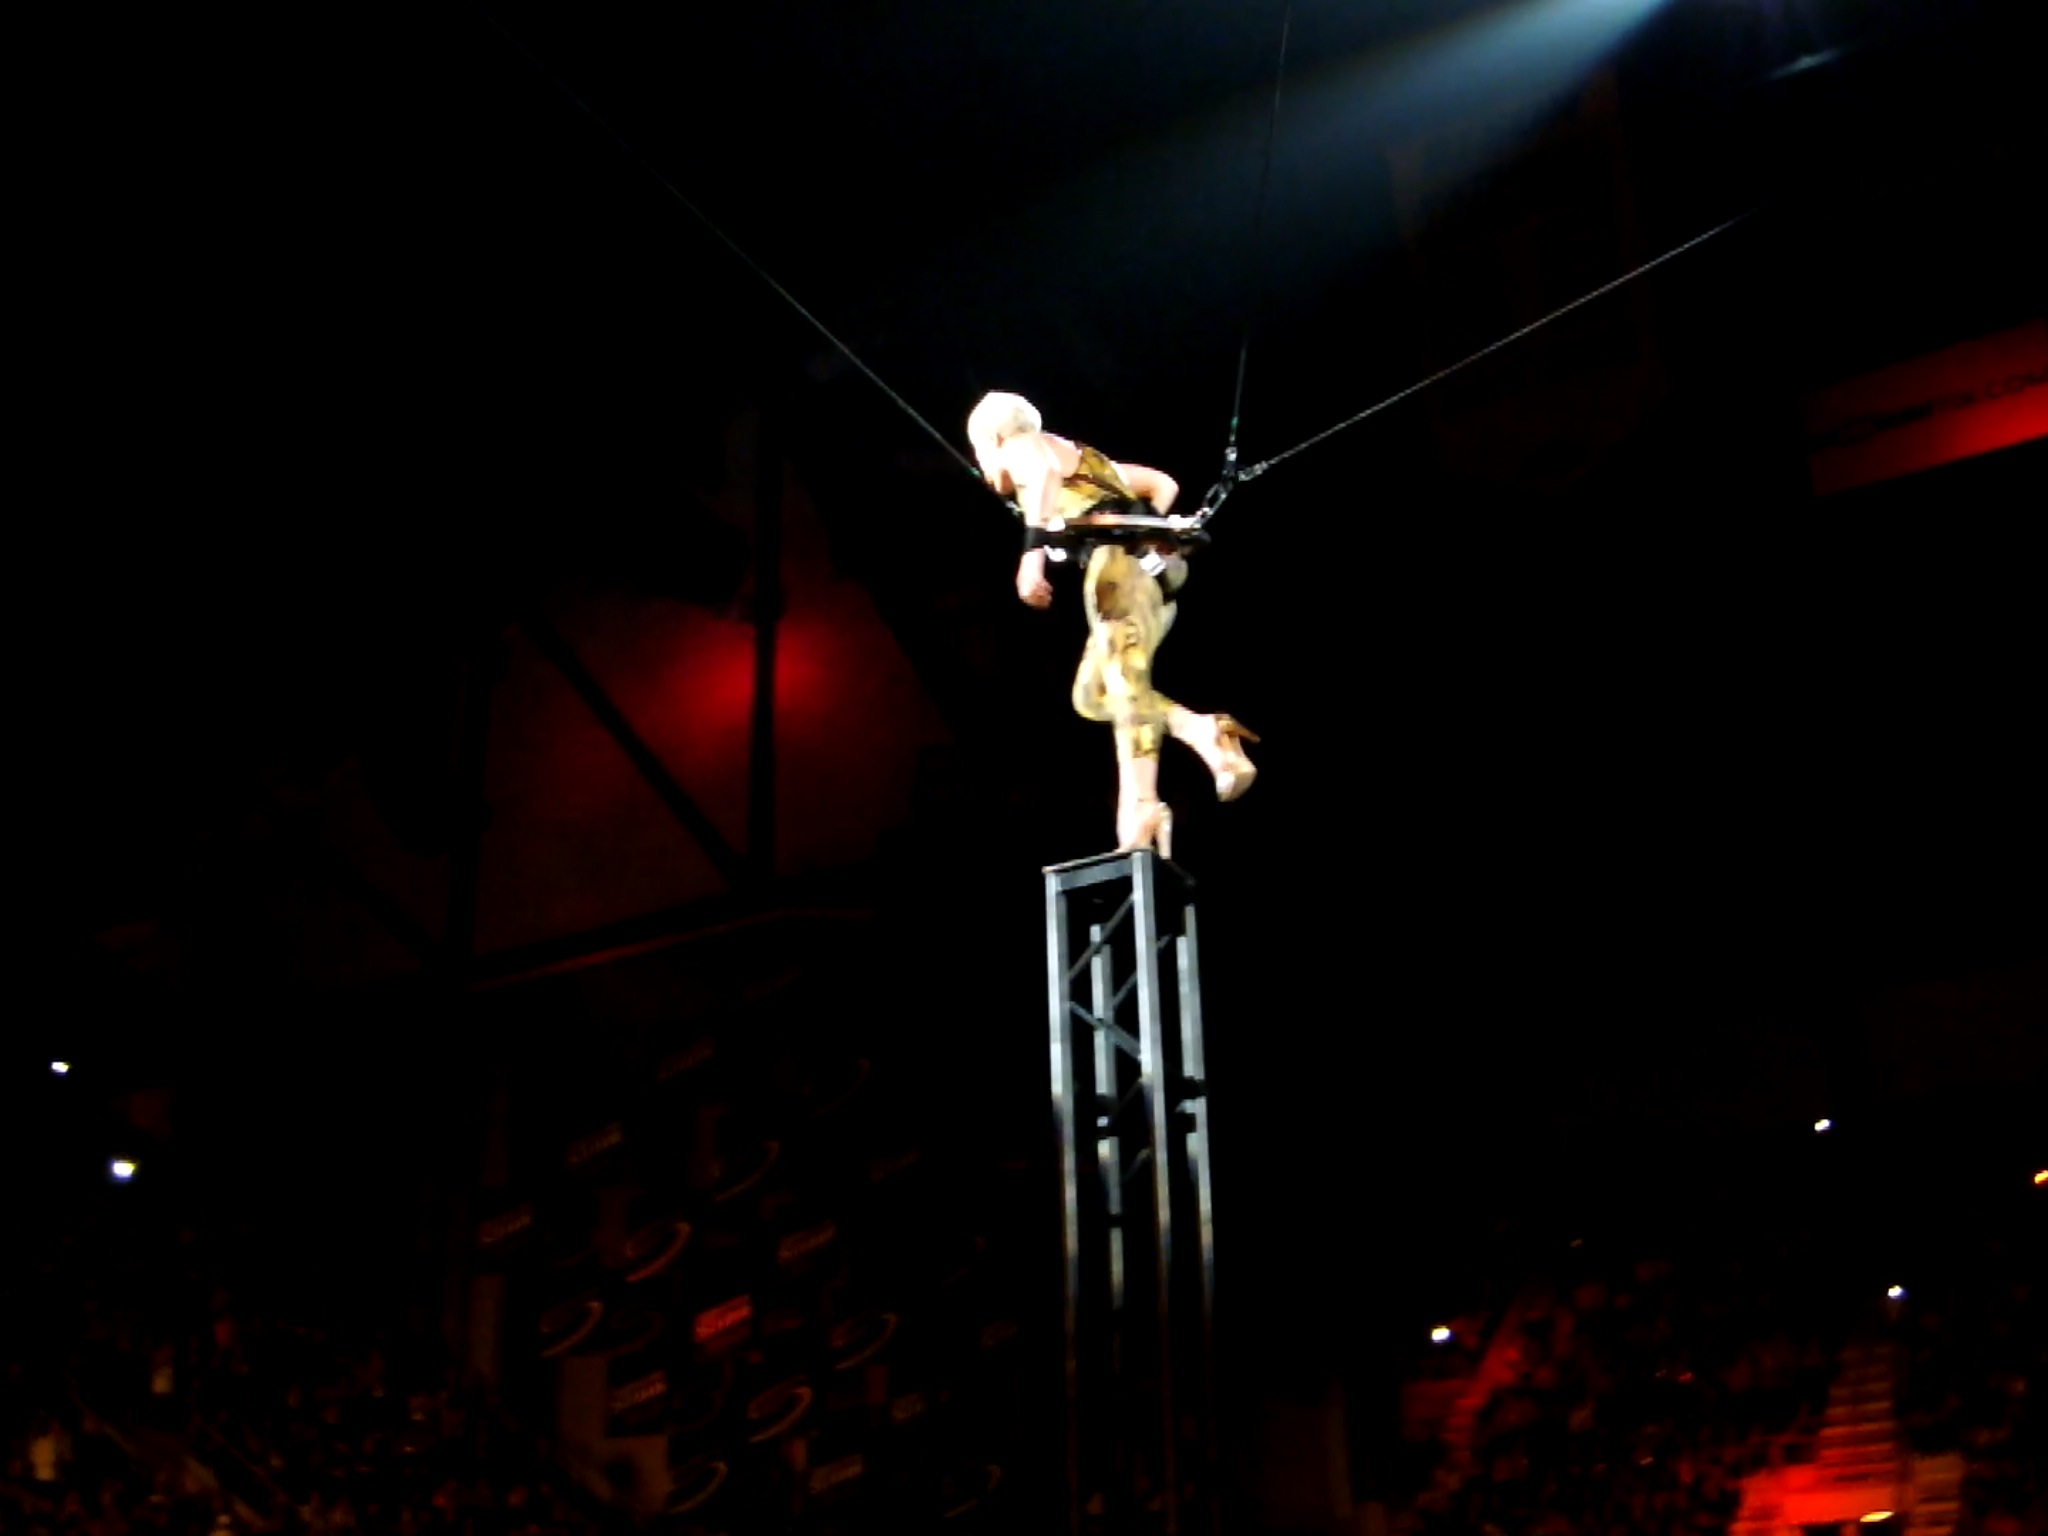 a performer is on a tight rope above a crowd